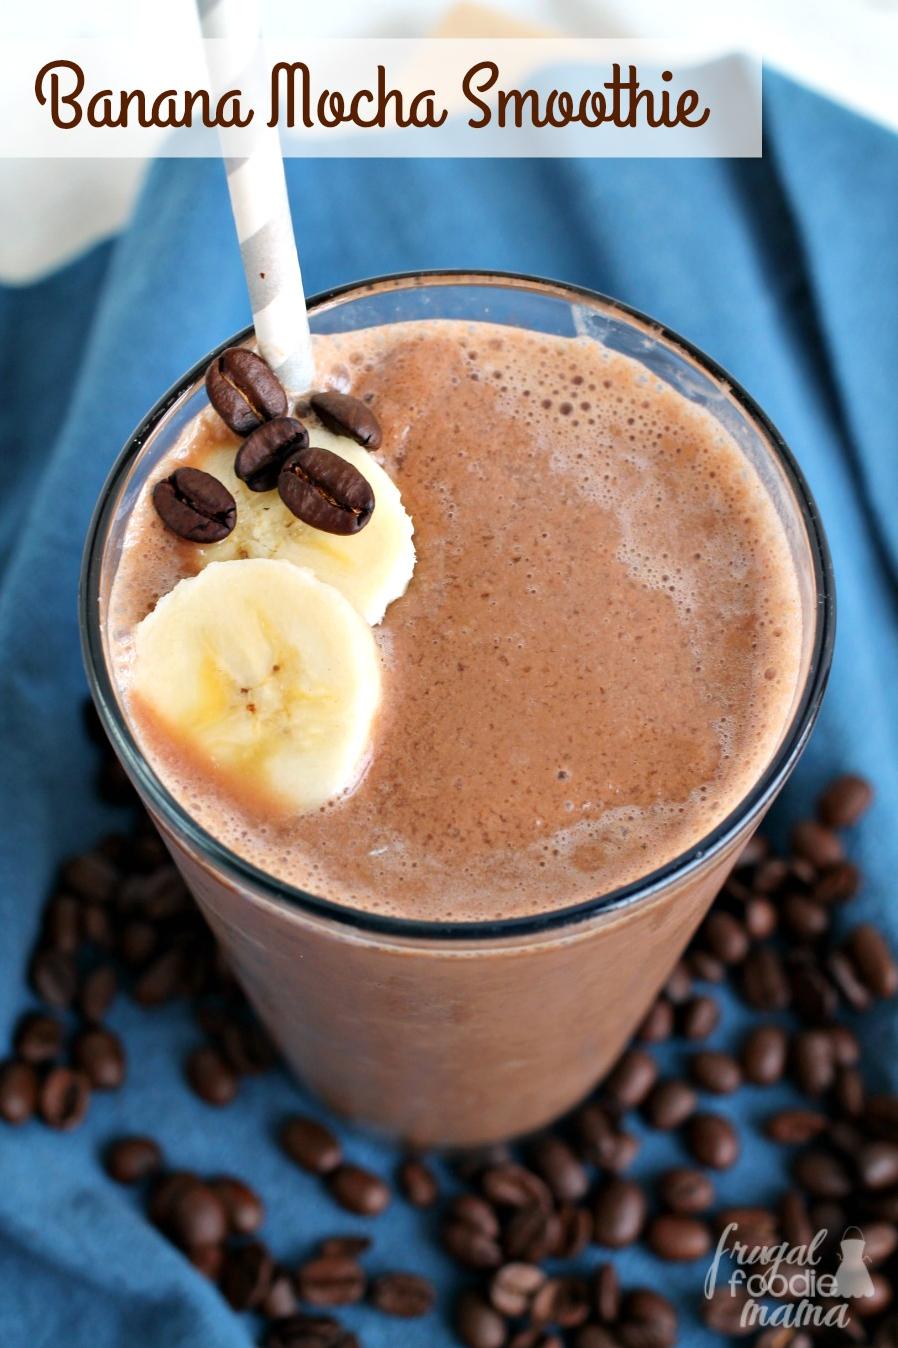  The perfect combination of bananas and chocolate in every sip.